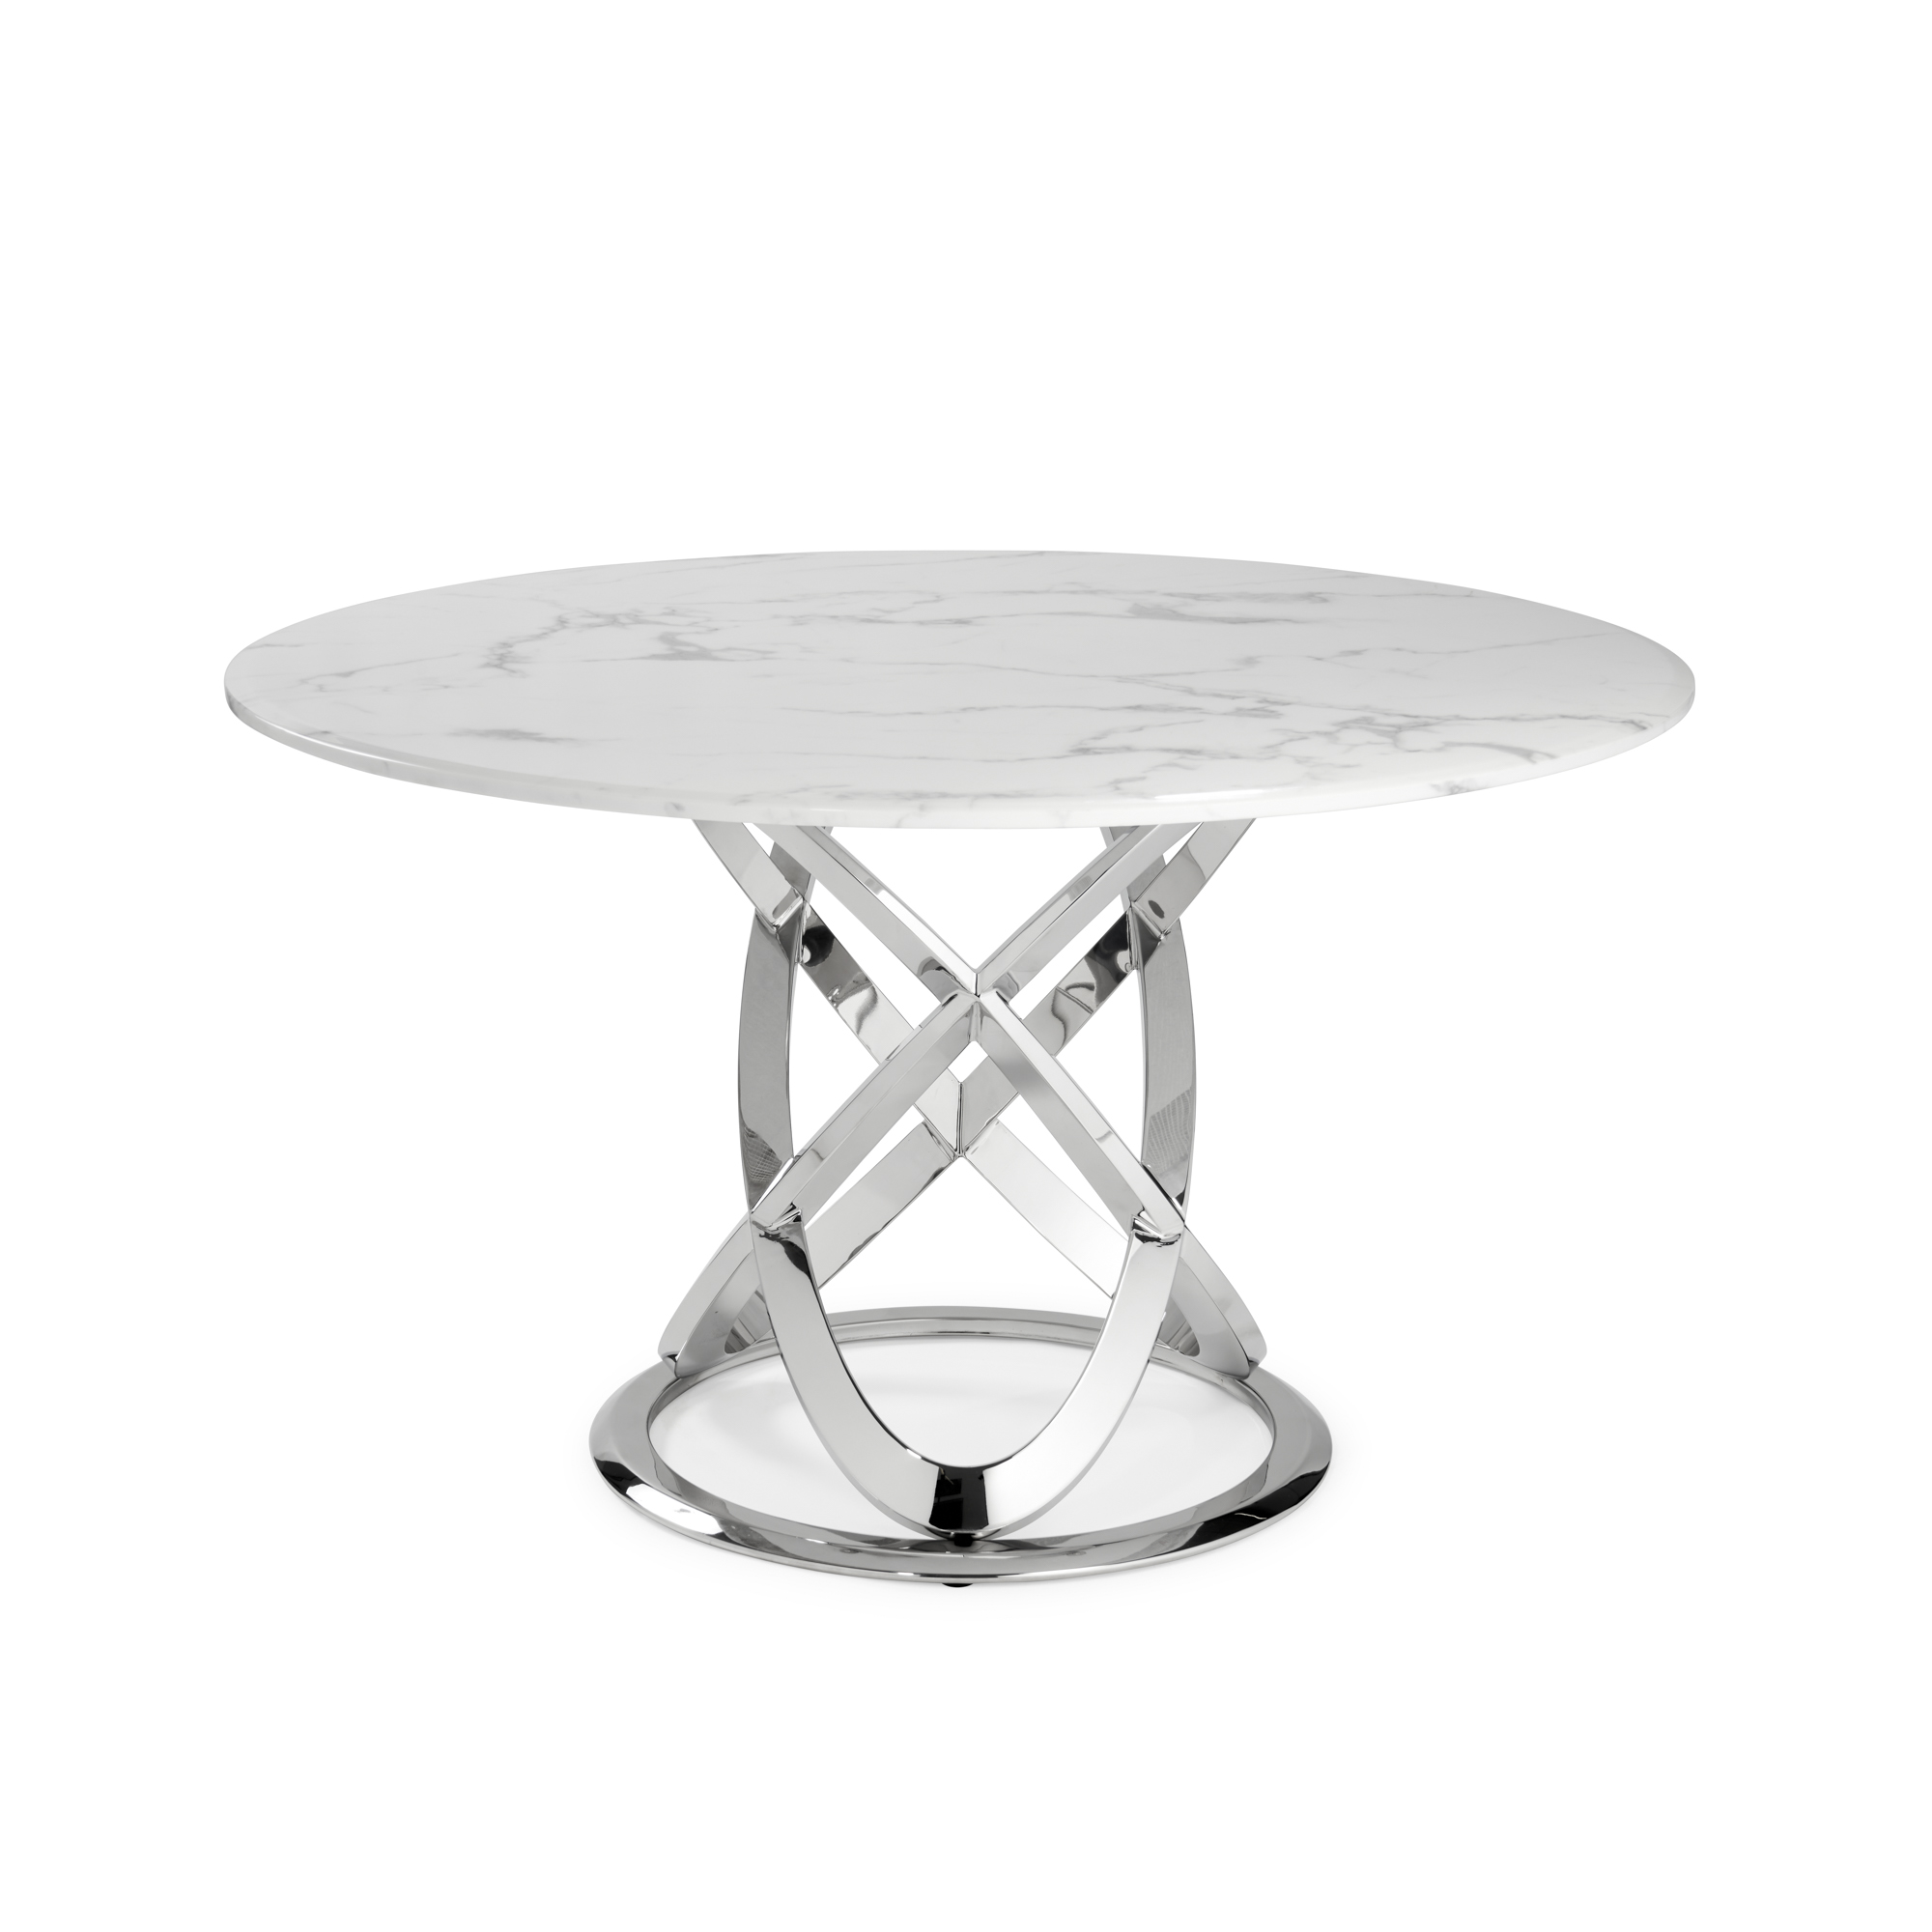 1.3M Pedestal Polished Circular Stainless Steel Dining Table with White Marble Effect